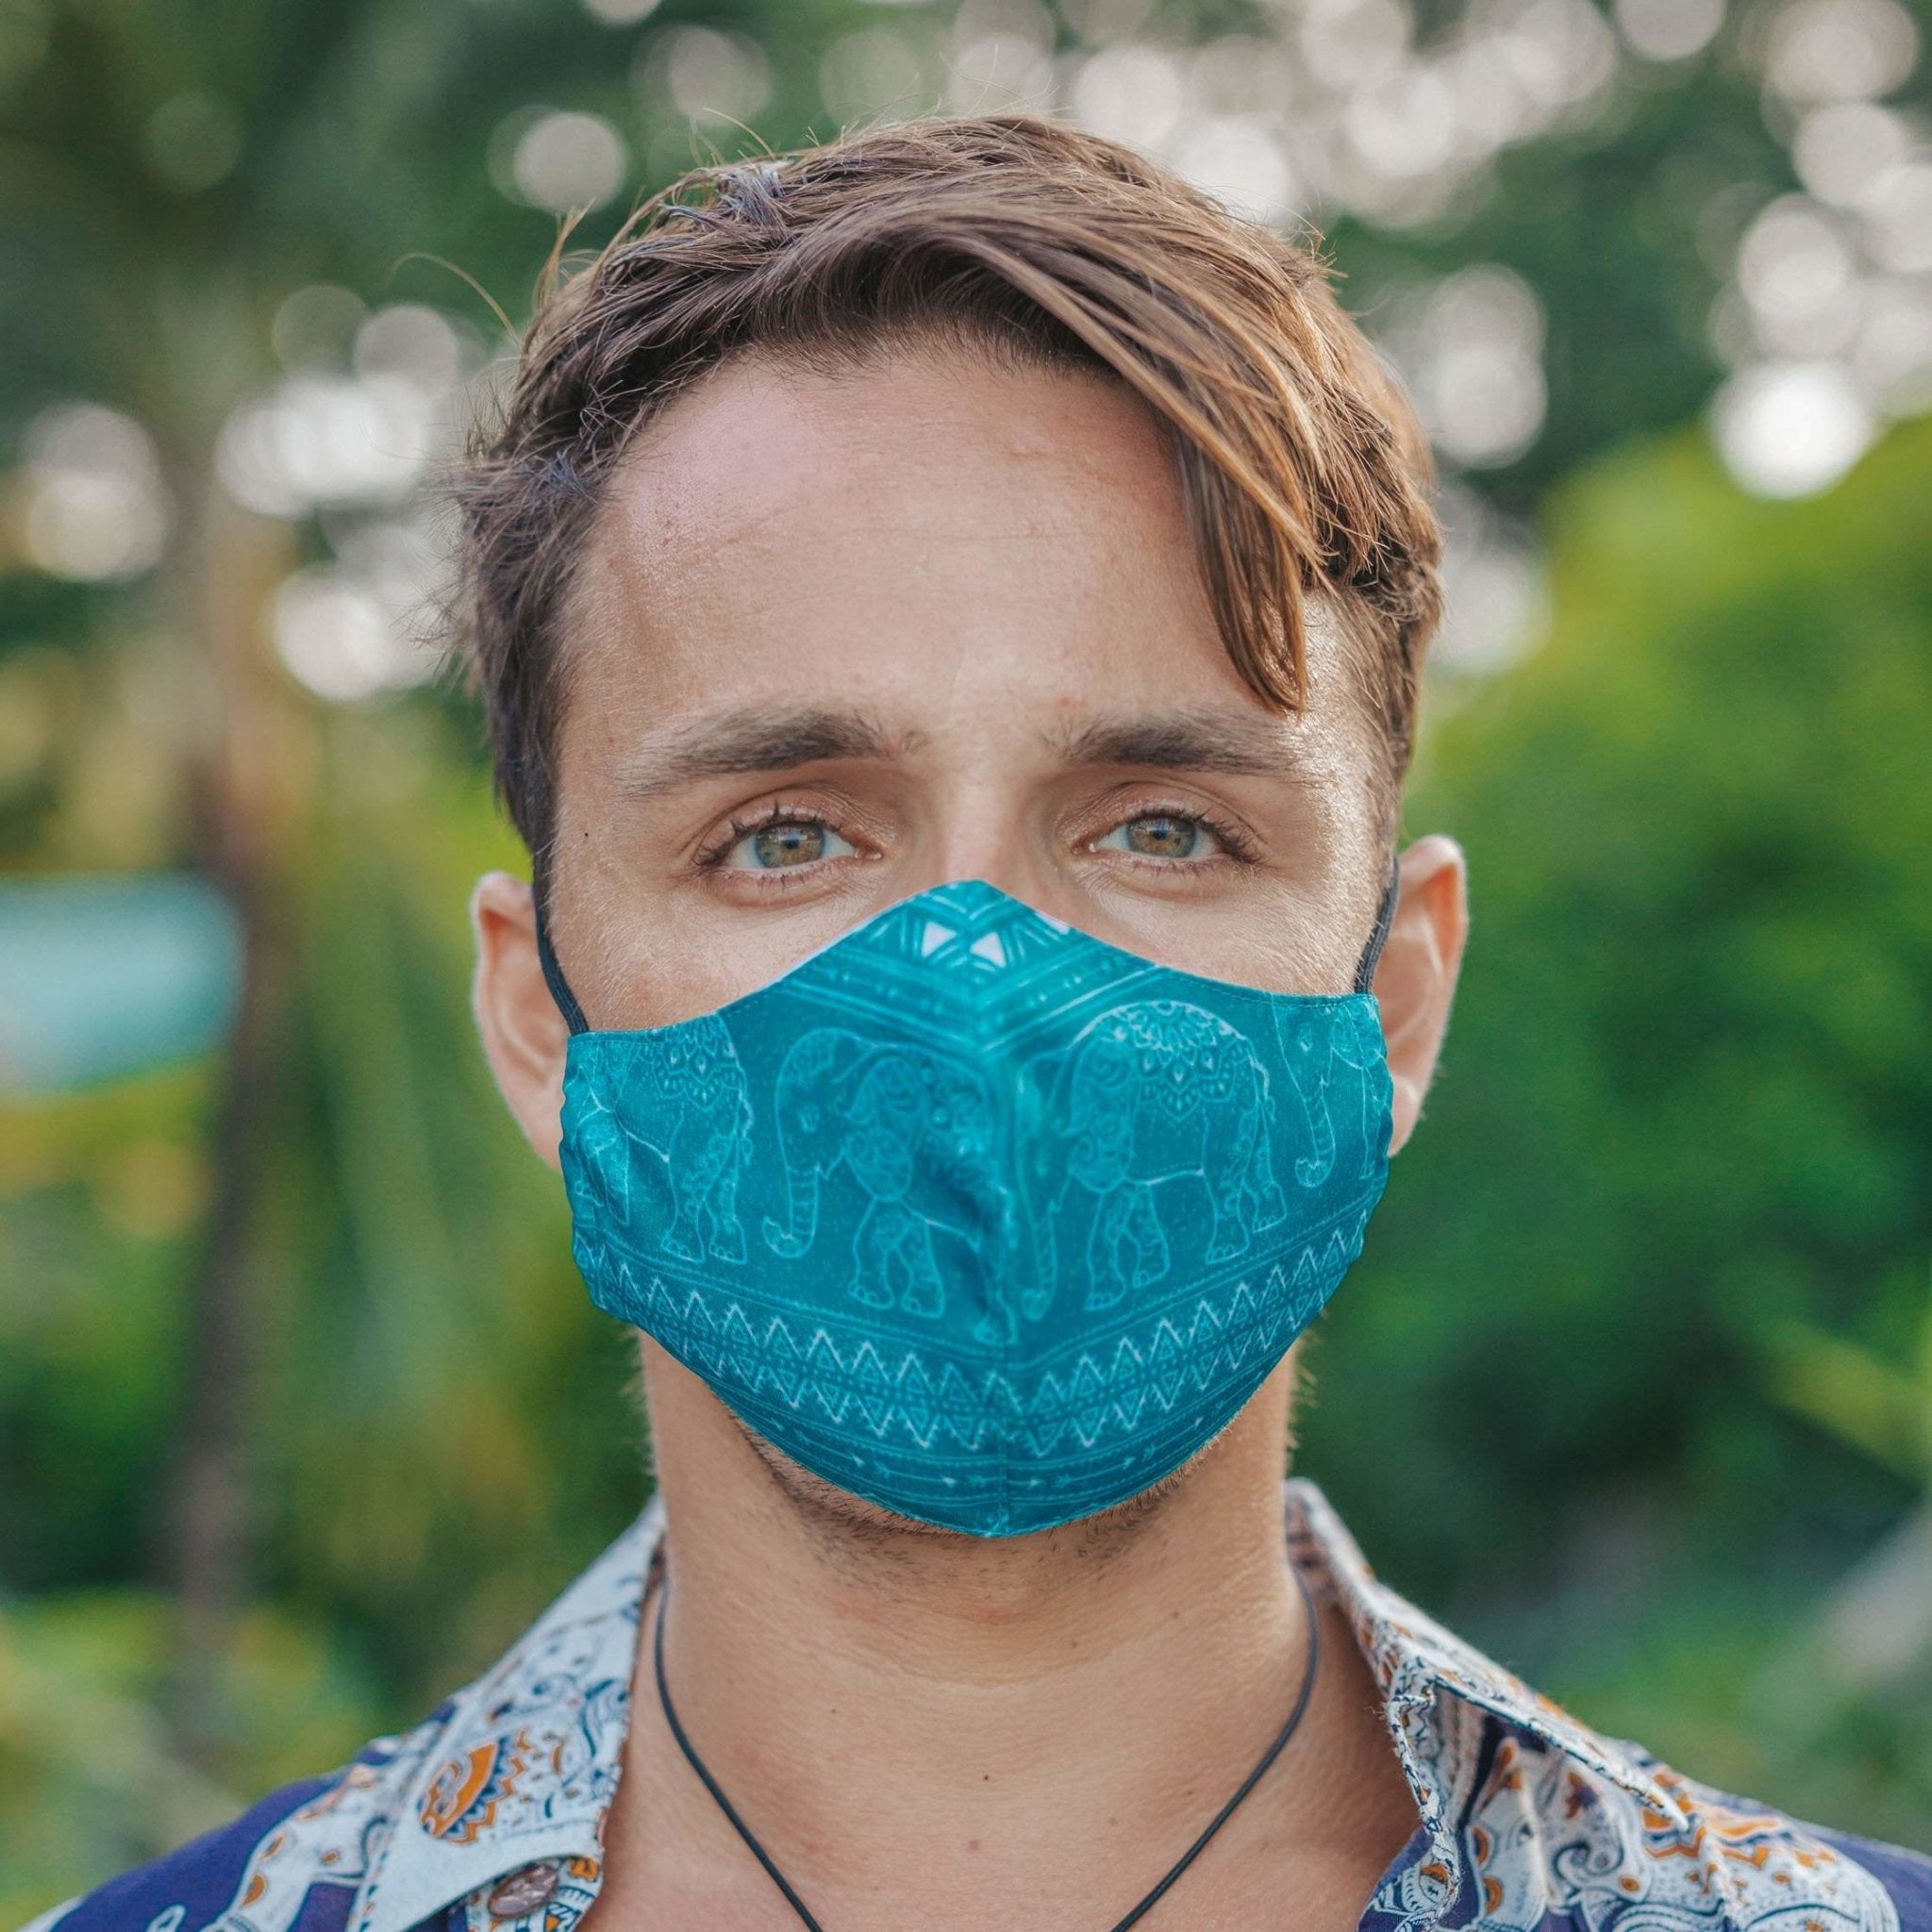 FACE MASK - Teal Elepanta Face Masks - Buy Today Elephant Pants Jewelry And Bohemian Clothes Handmade In Thailand Help To Save The Elephants FairTrade And Vegan